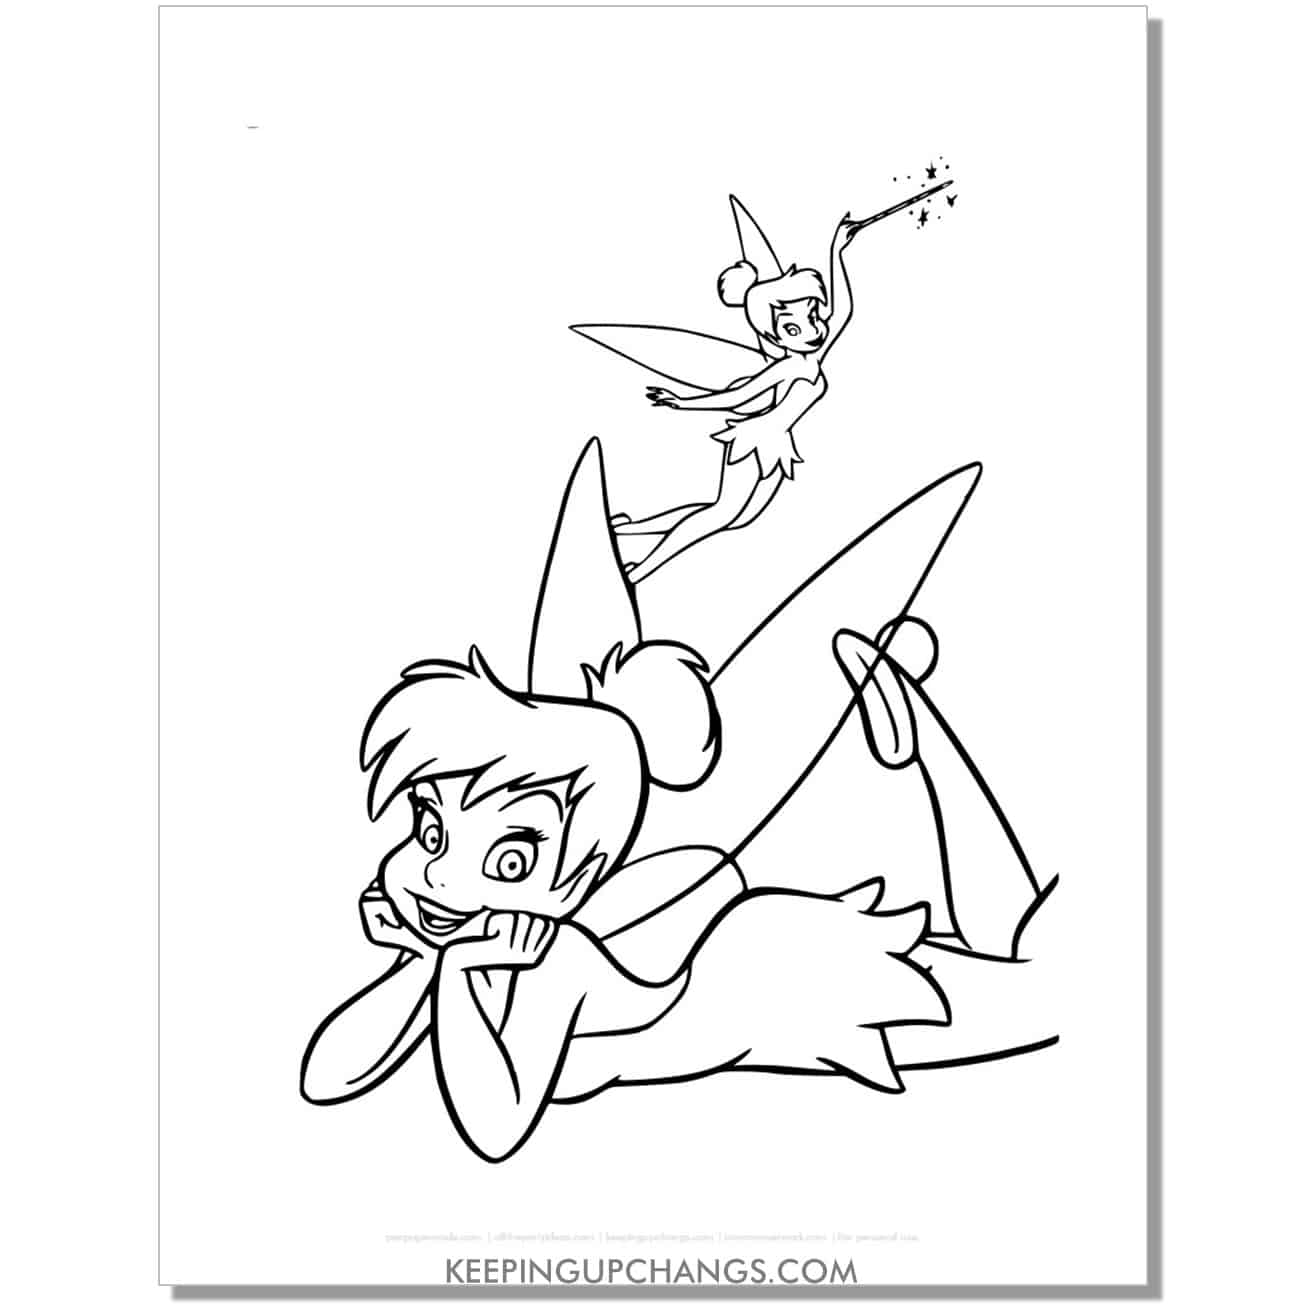 tinkerbell laying on stomach coloring page, sheet.